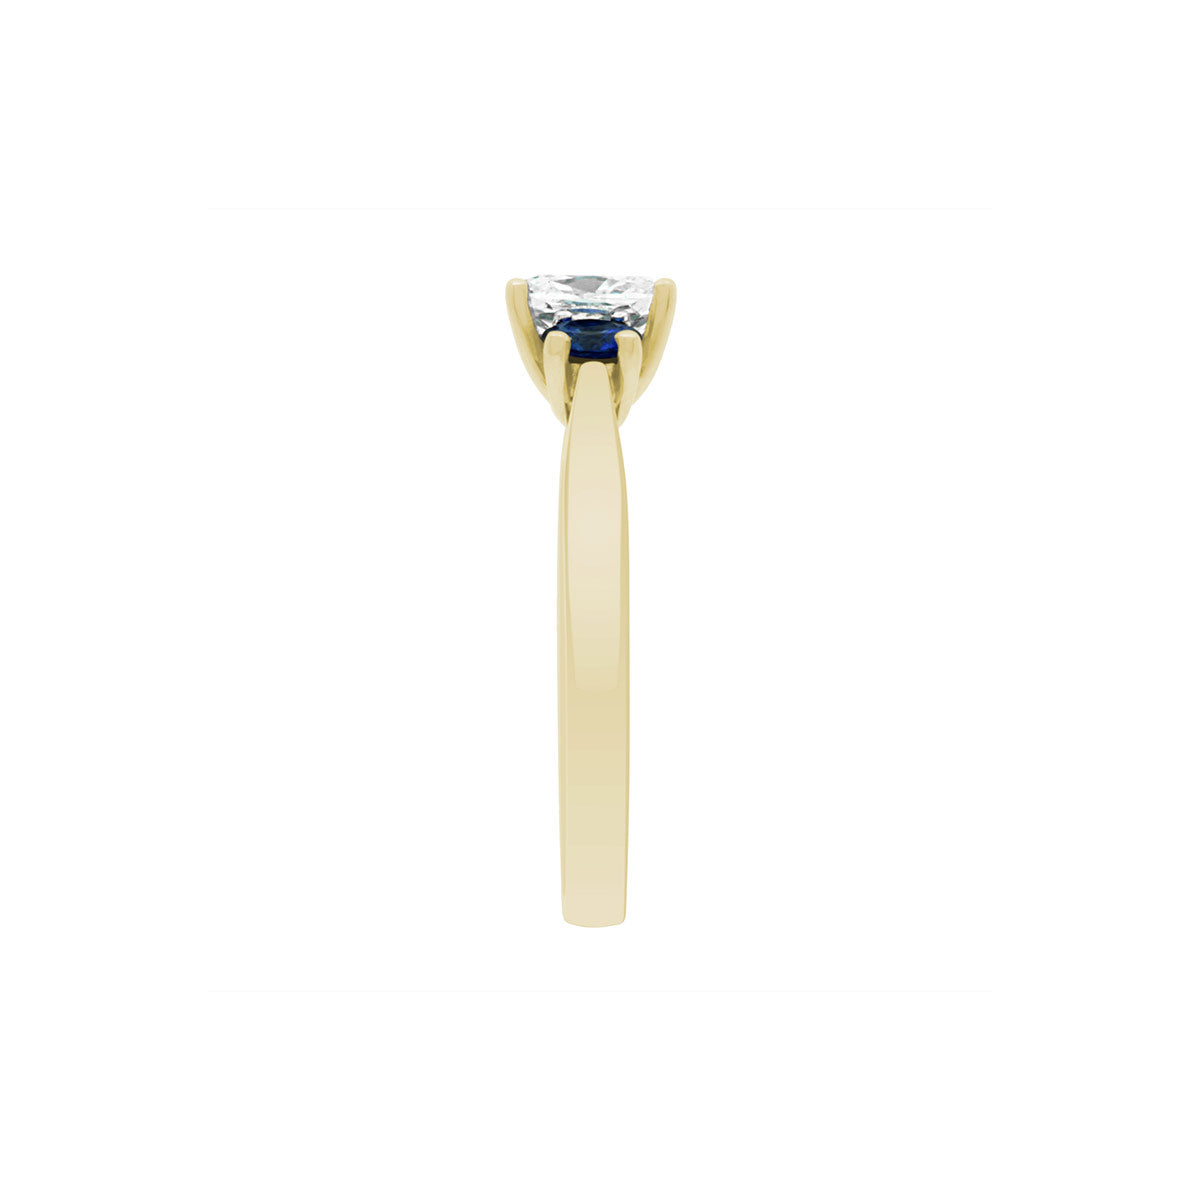 Diamond Sapphire Trilogy set in yellow gold in an upright position from the side